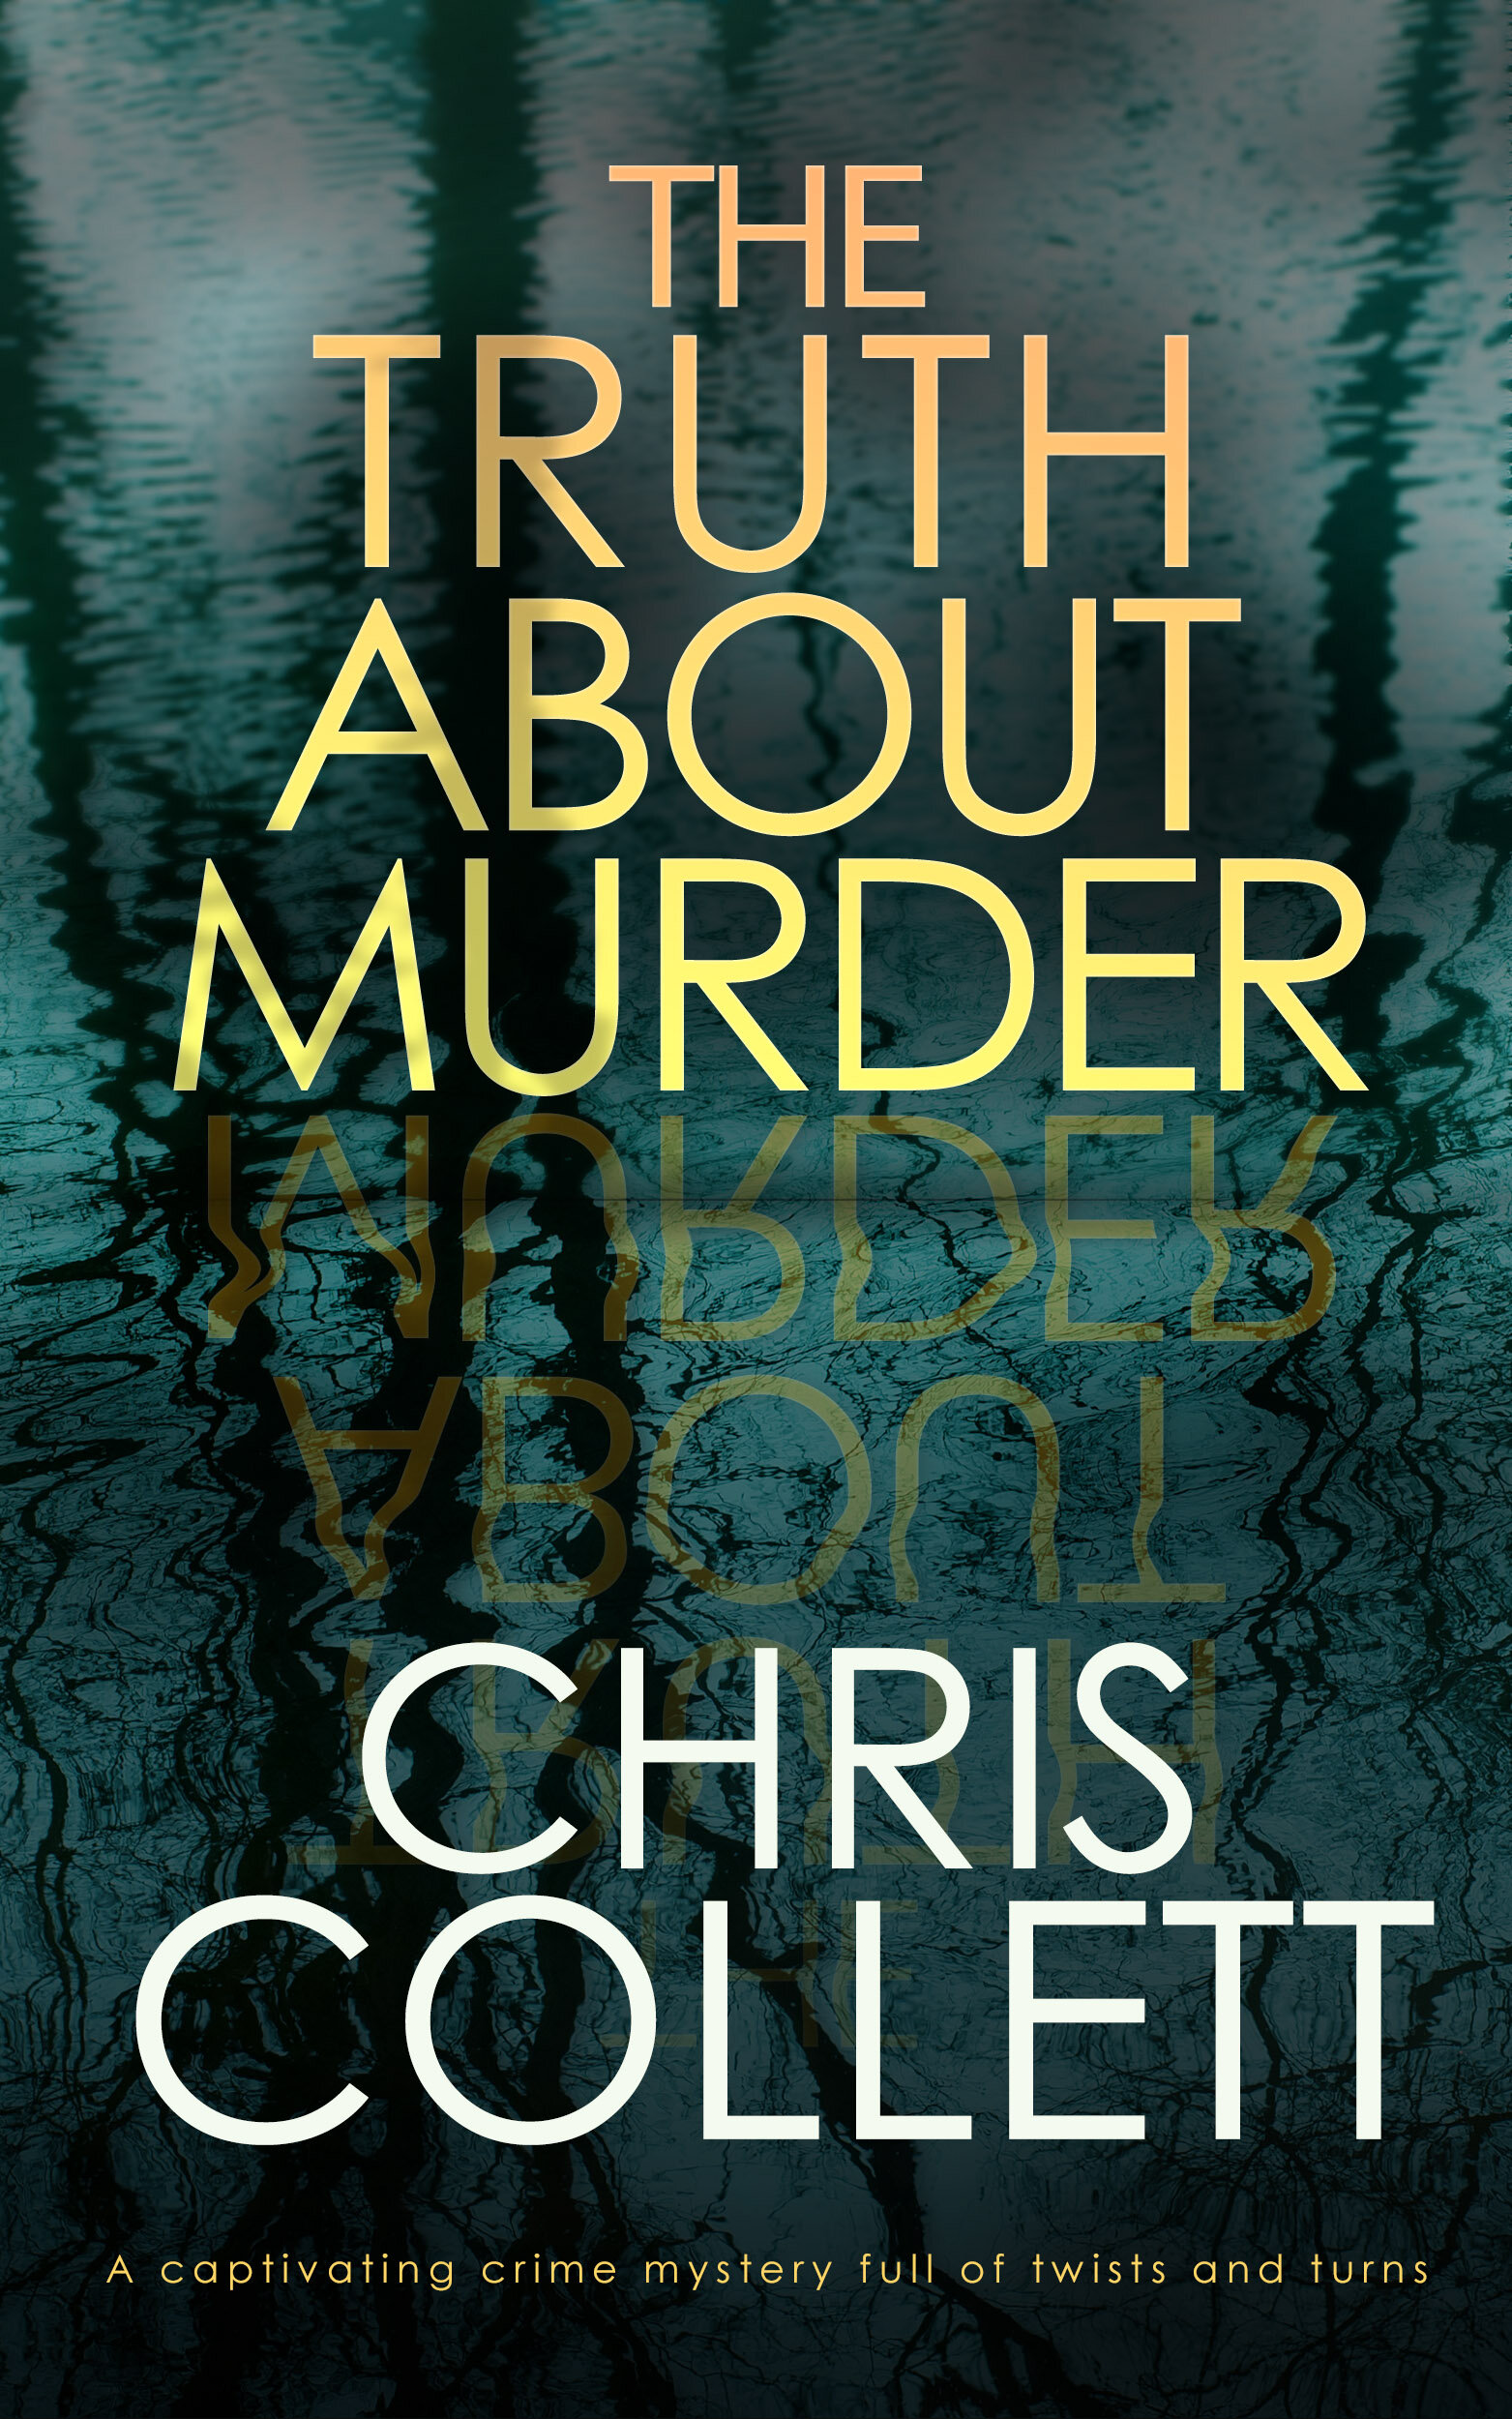 THE TRUTH ABOUT MURDER PUBLISH Cover JJ.jpg